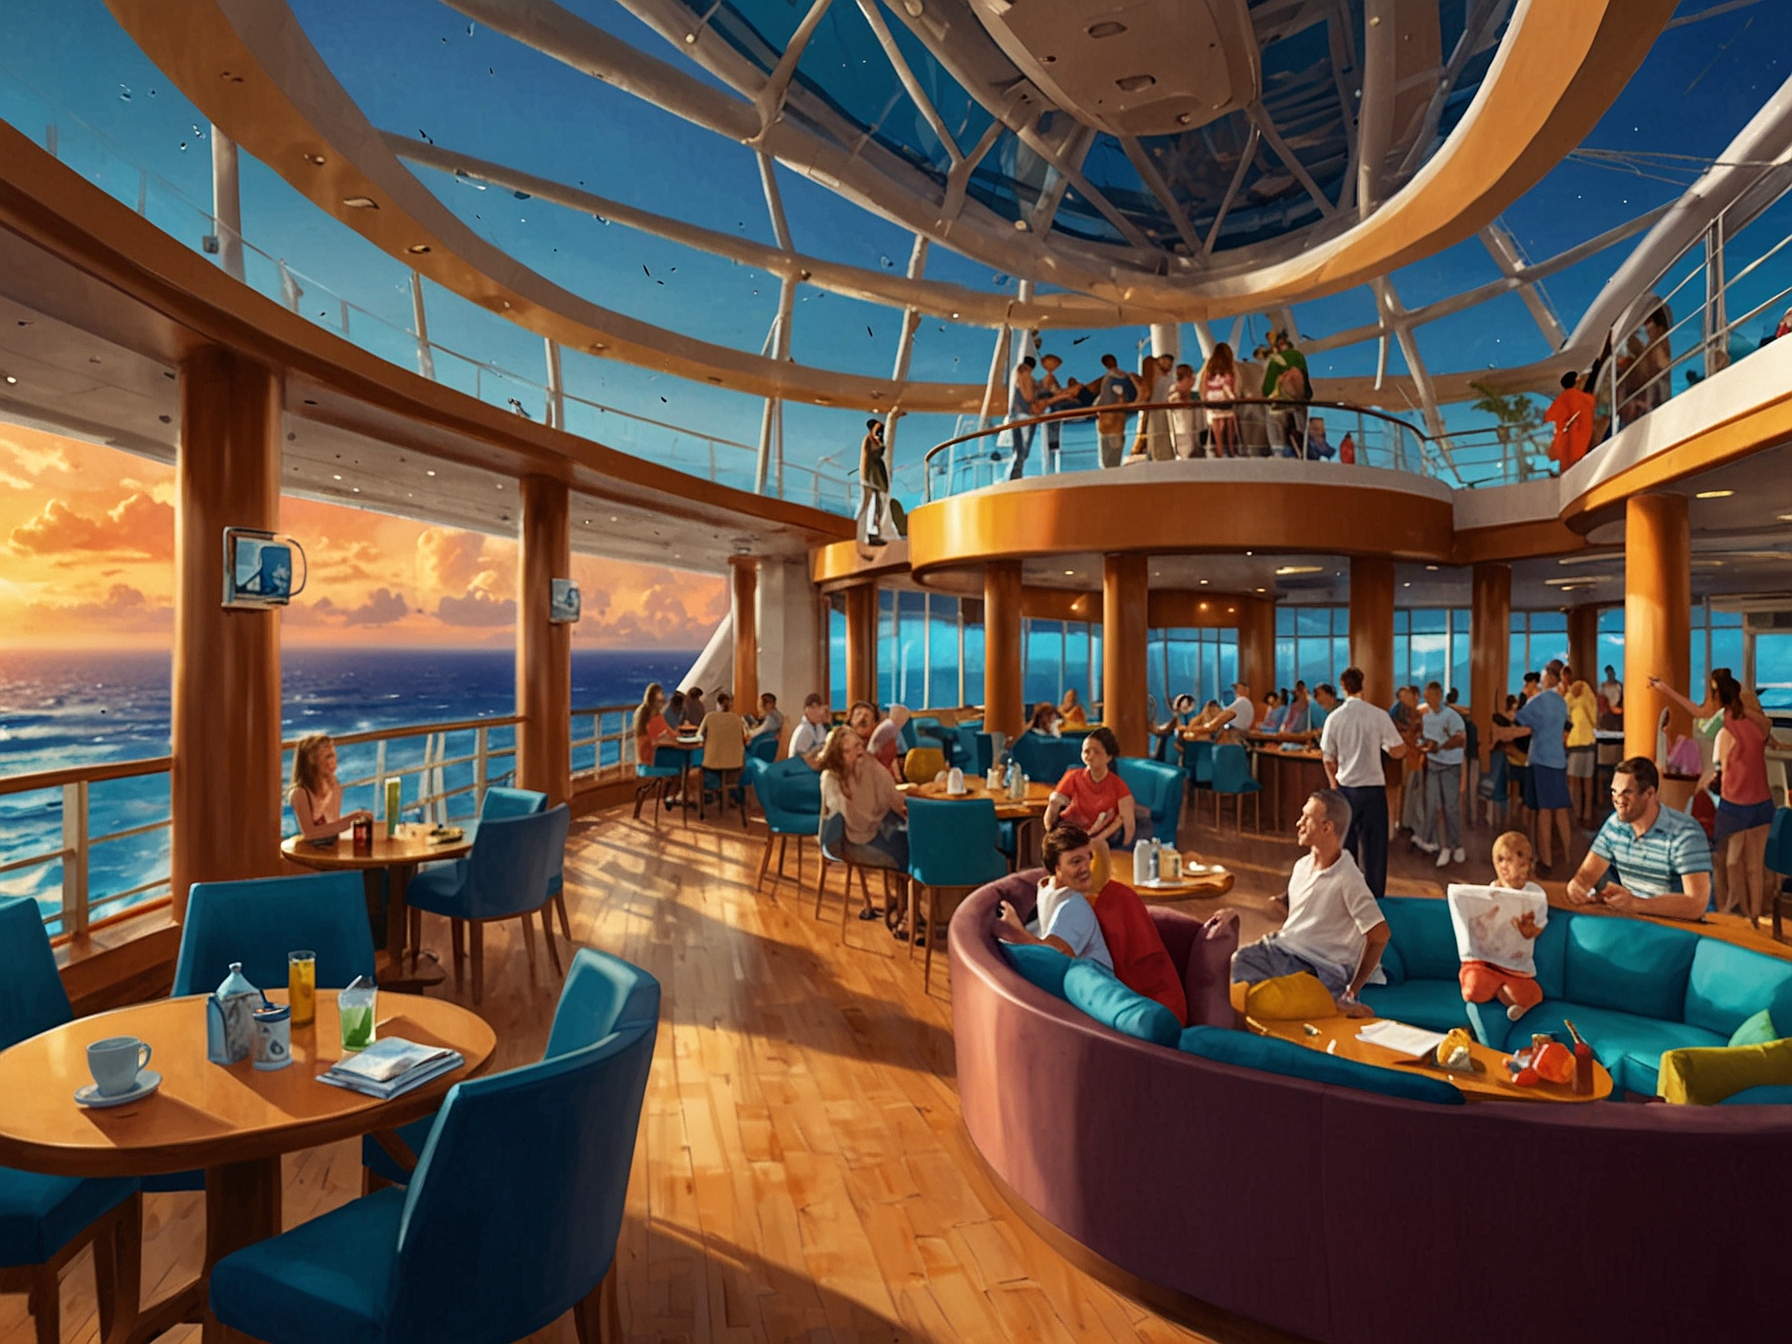 A vibrant scene on a Royal Caribbean cruise, showcasing happy passengers enjoying state-of-the-art amenities and onboard activities, depicting the enhanced travel experiences contributing to its success.